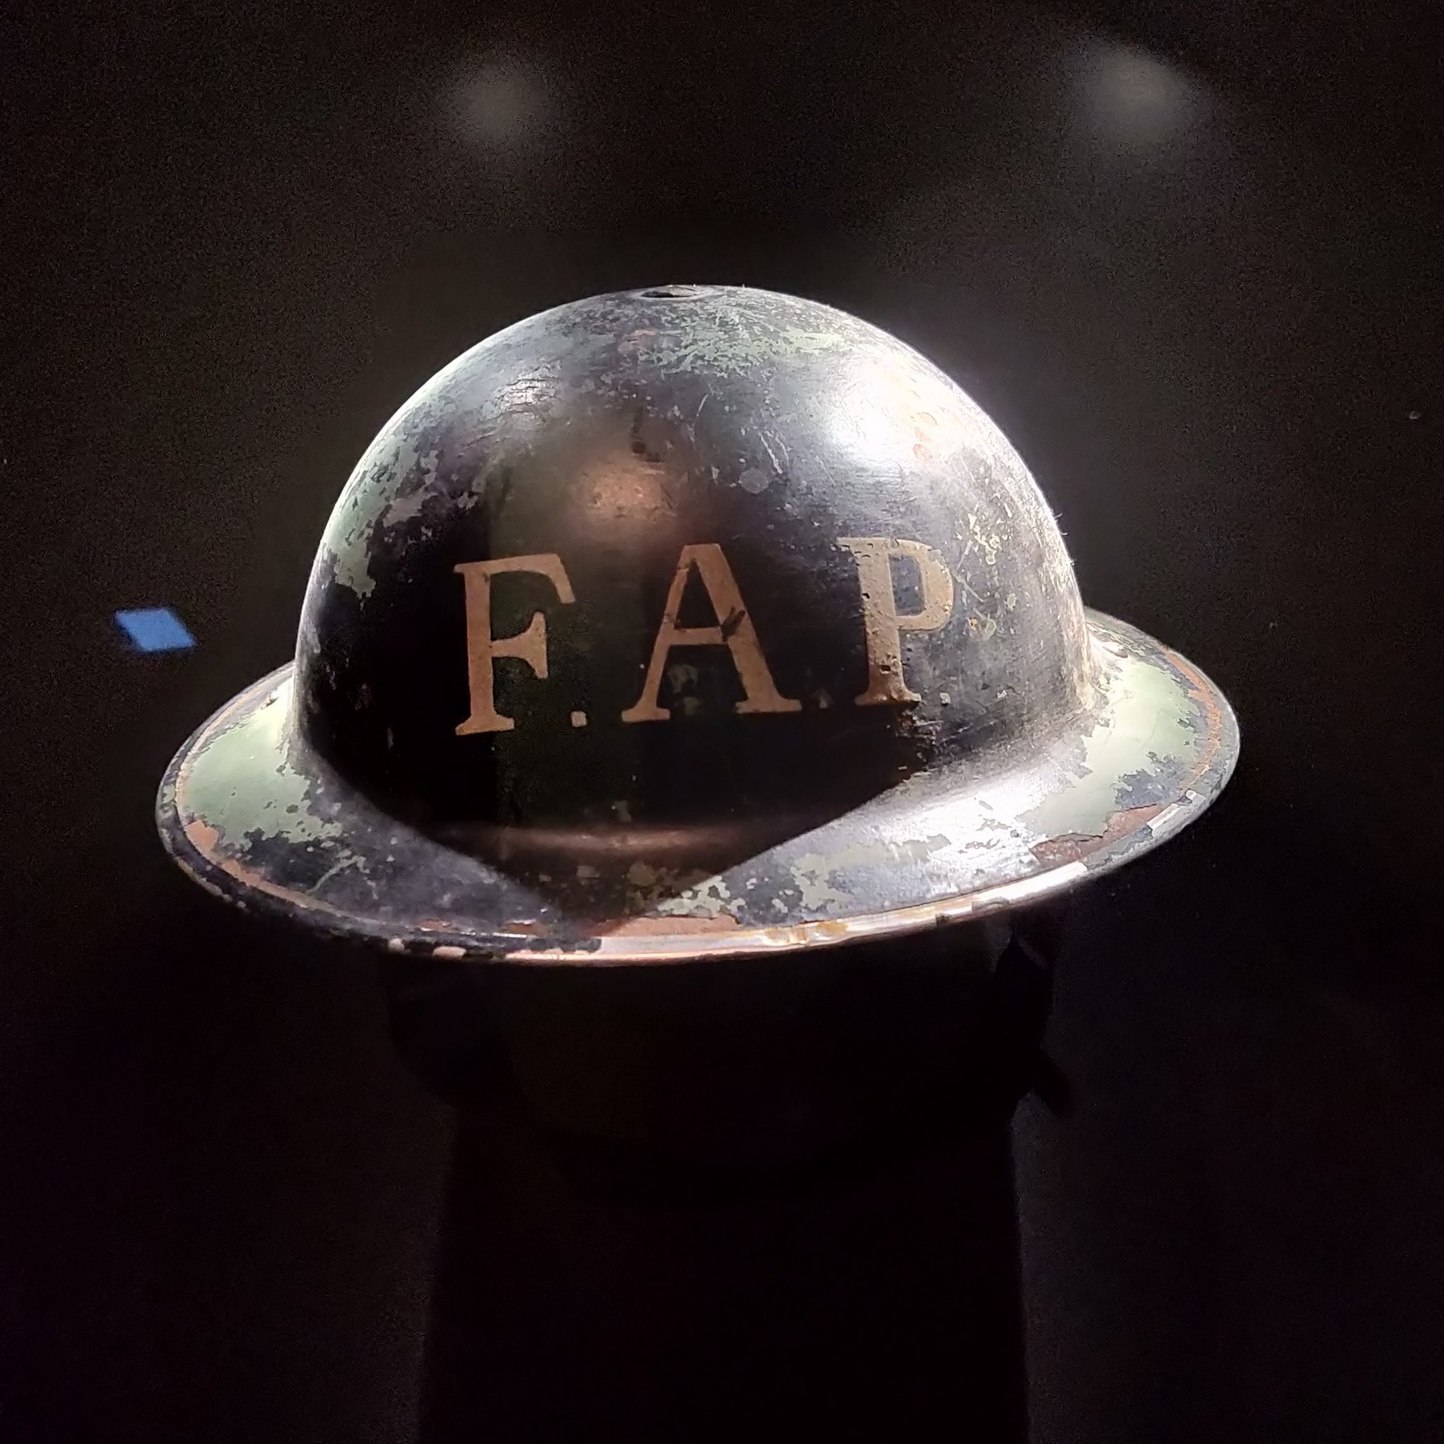 This is a helmet of a german soldier... I didn't add a caption but you can make our own memes...